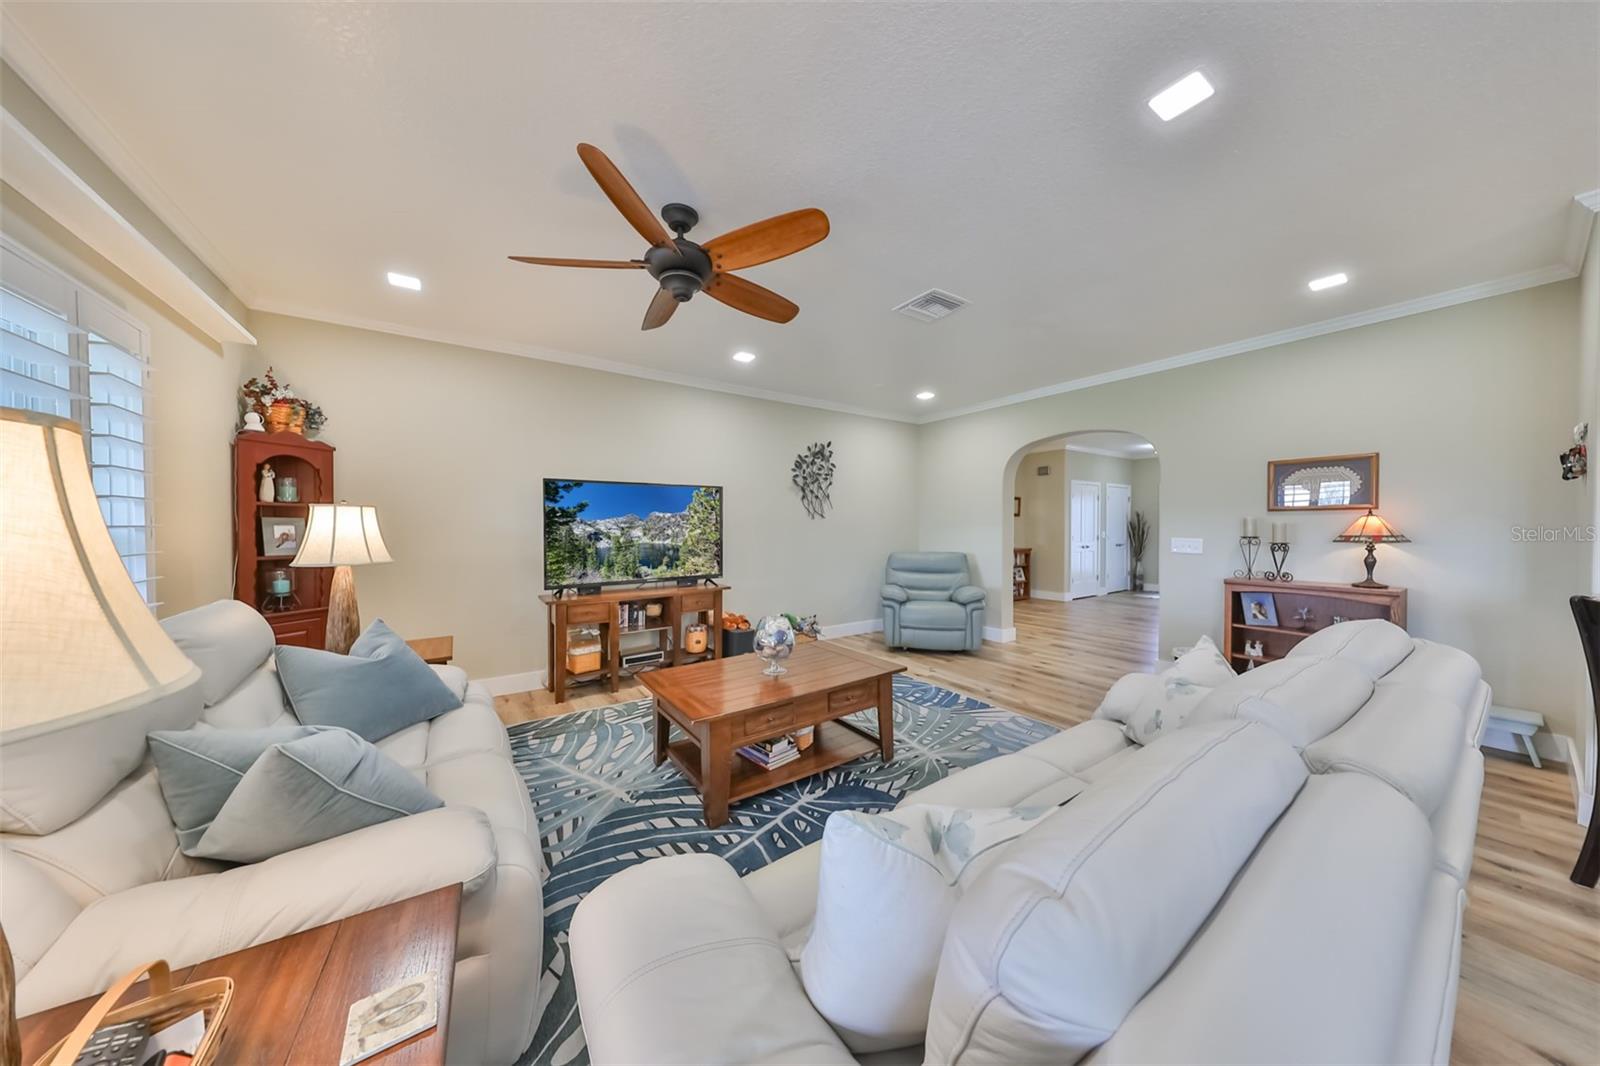 The great room feels contemporary and tranquil with soft tones, custom ceiling fan, high ceilings with crown molding, and recessed lighting for additional brightness.